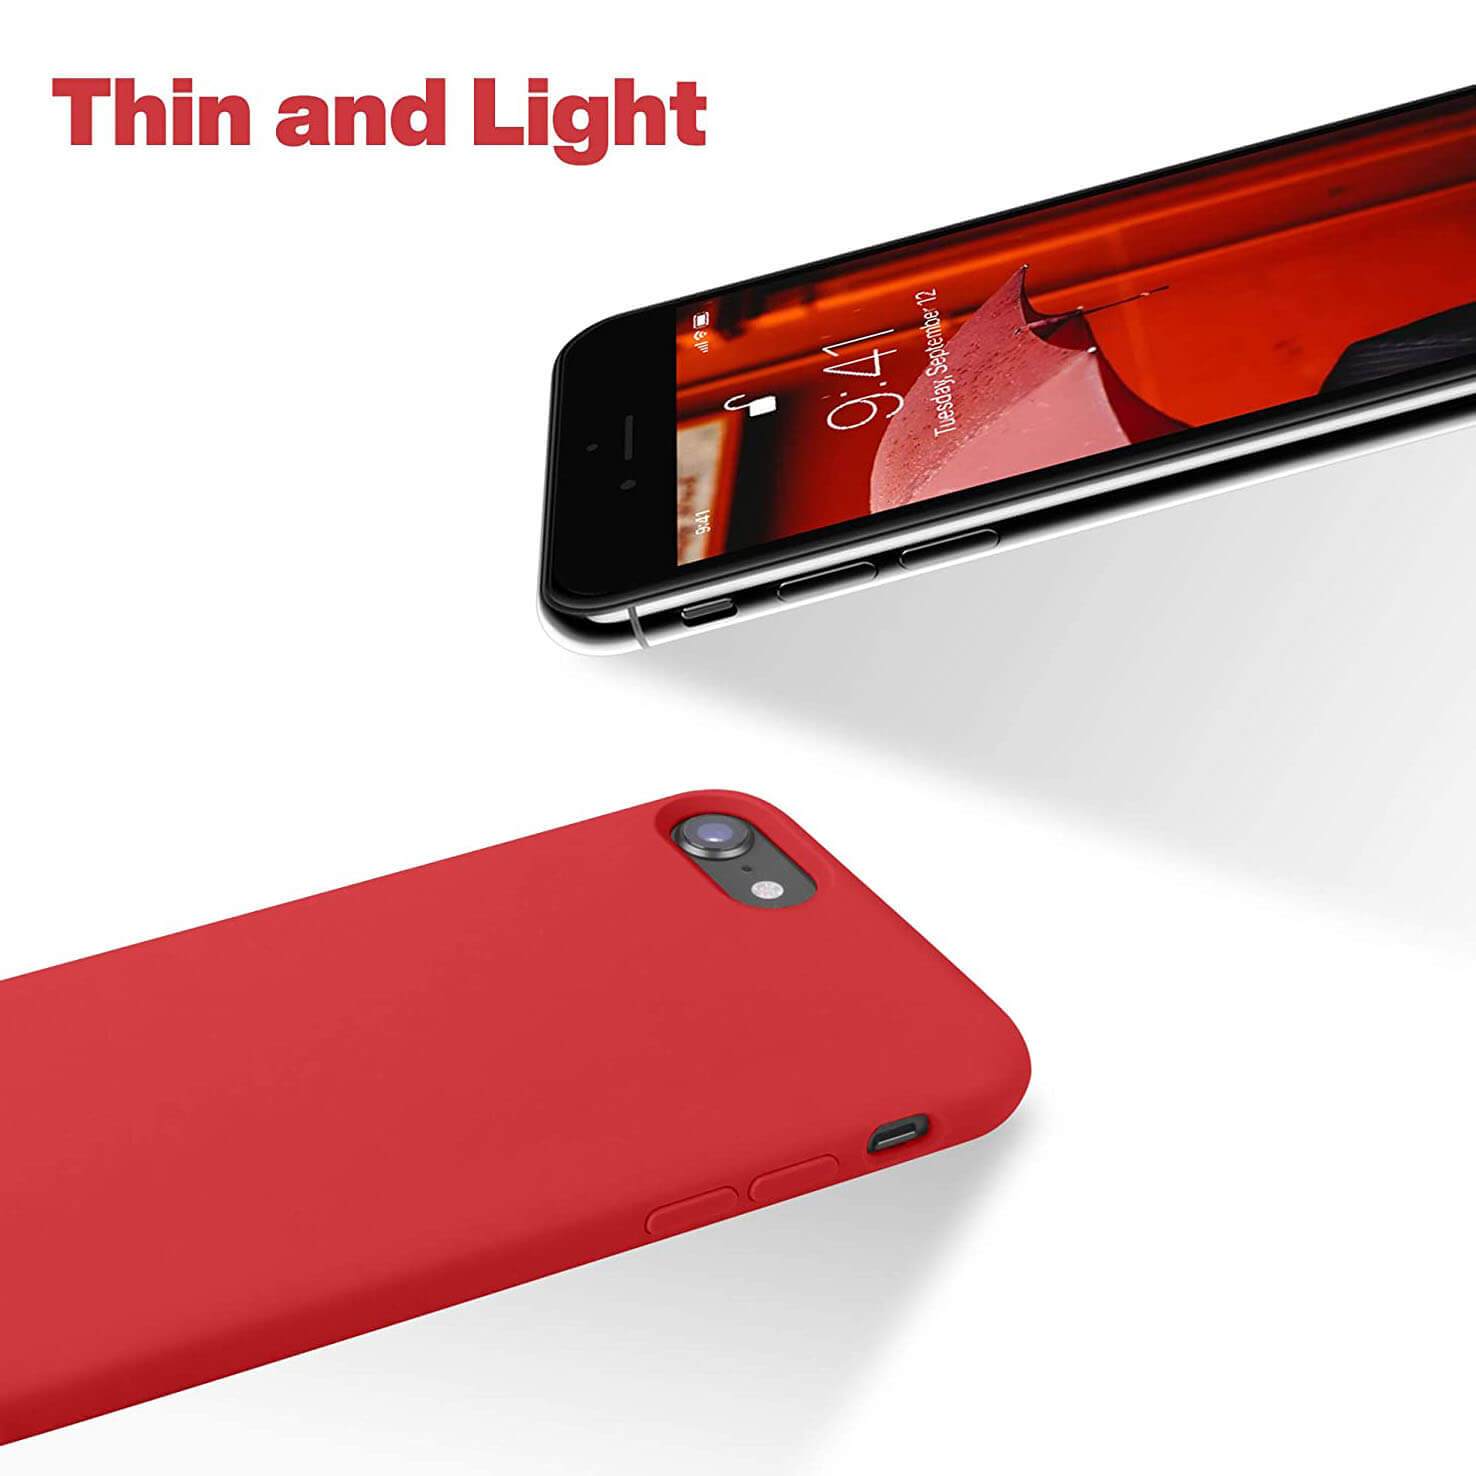 Liquid Silicone Case For Apple iPhone SE 2020 Luxury Thin Phone Cover Red